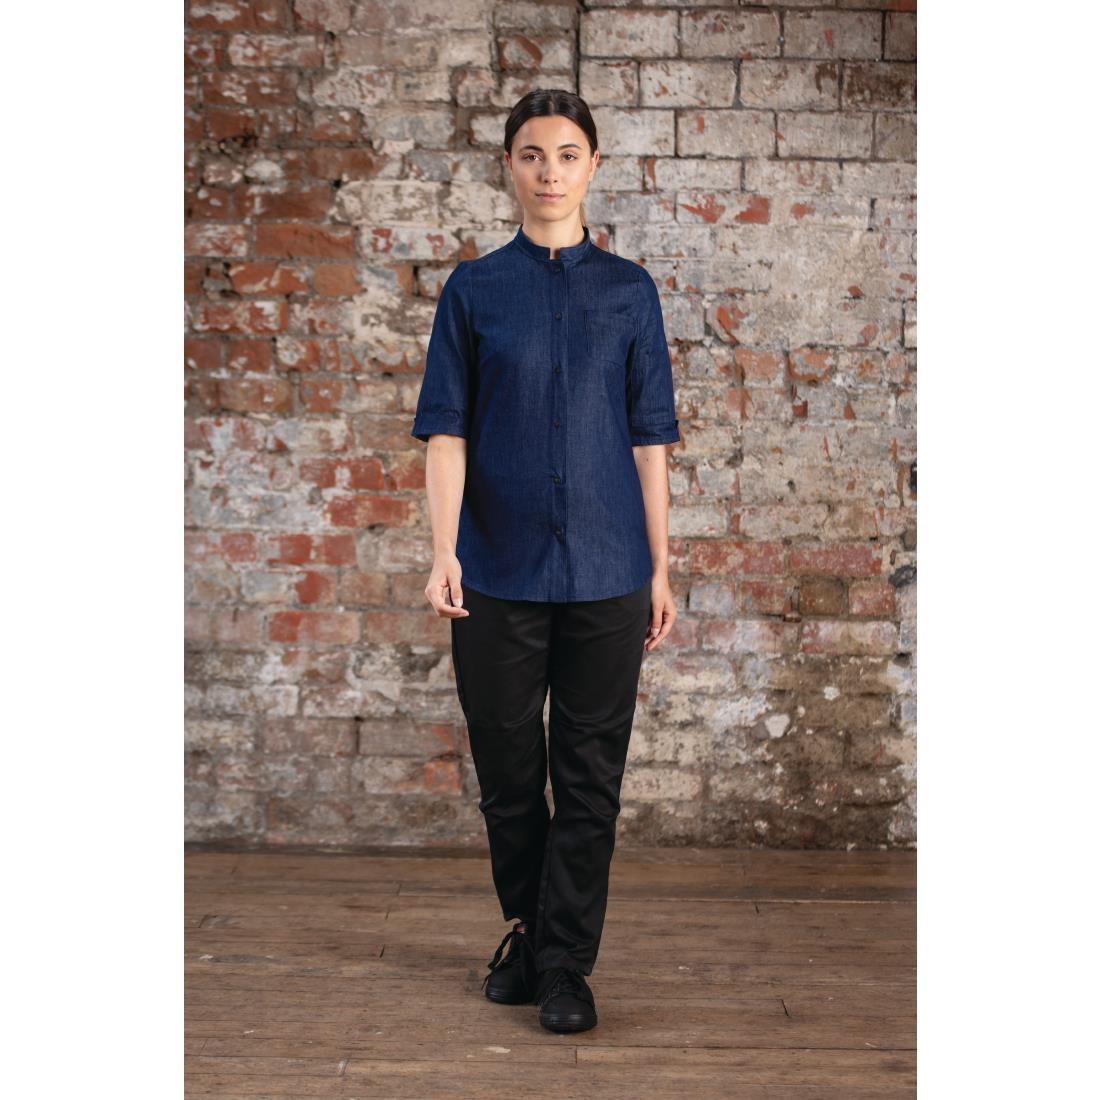 Southside Chefs Utility Trousers Black S - B989-S  - 11